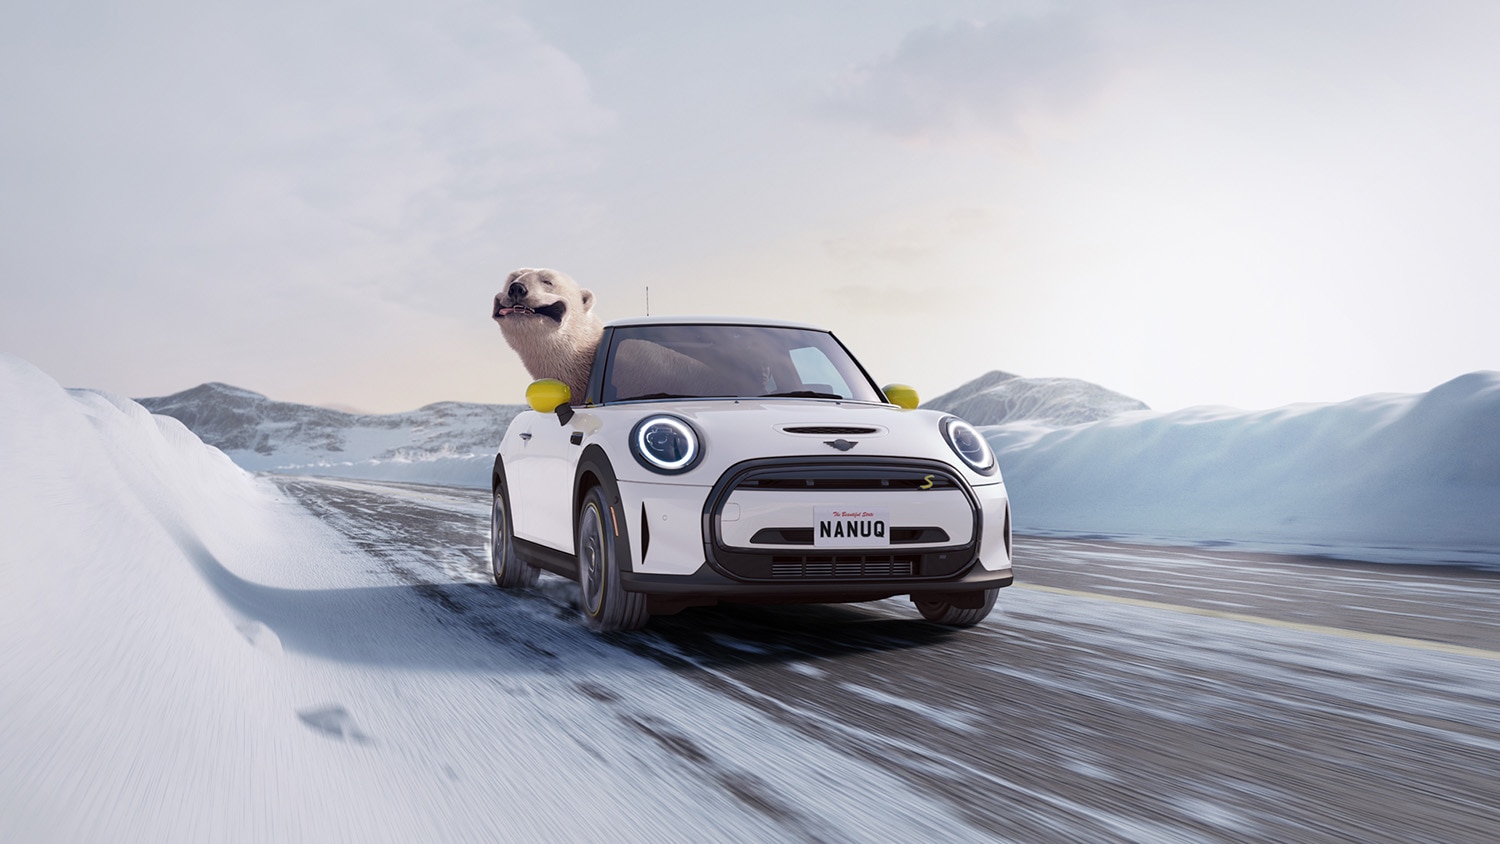 2023 Mini Cooper Electric SE in Nanuq White with a polar bear smiling outside the passenger window